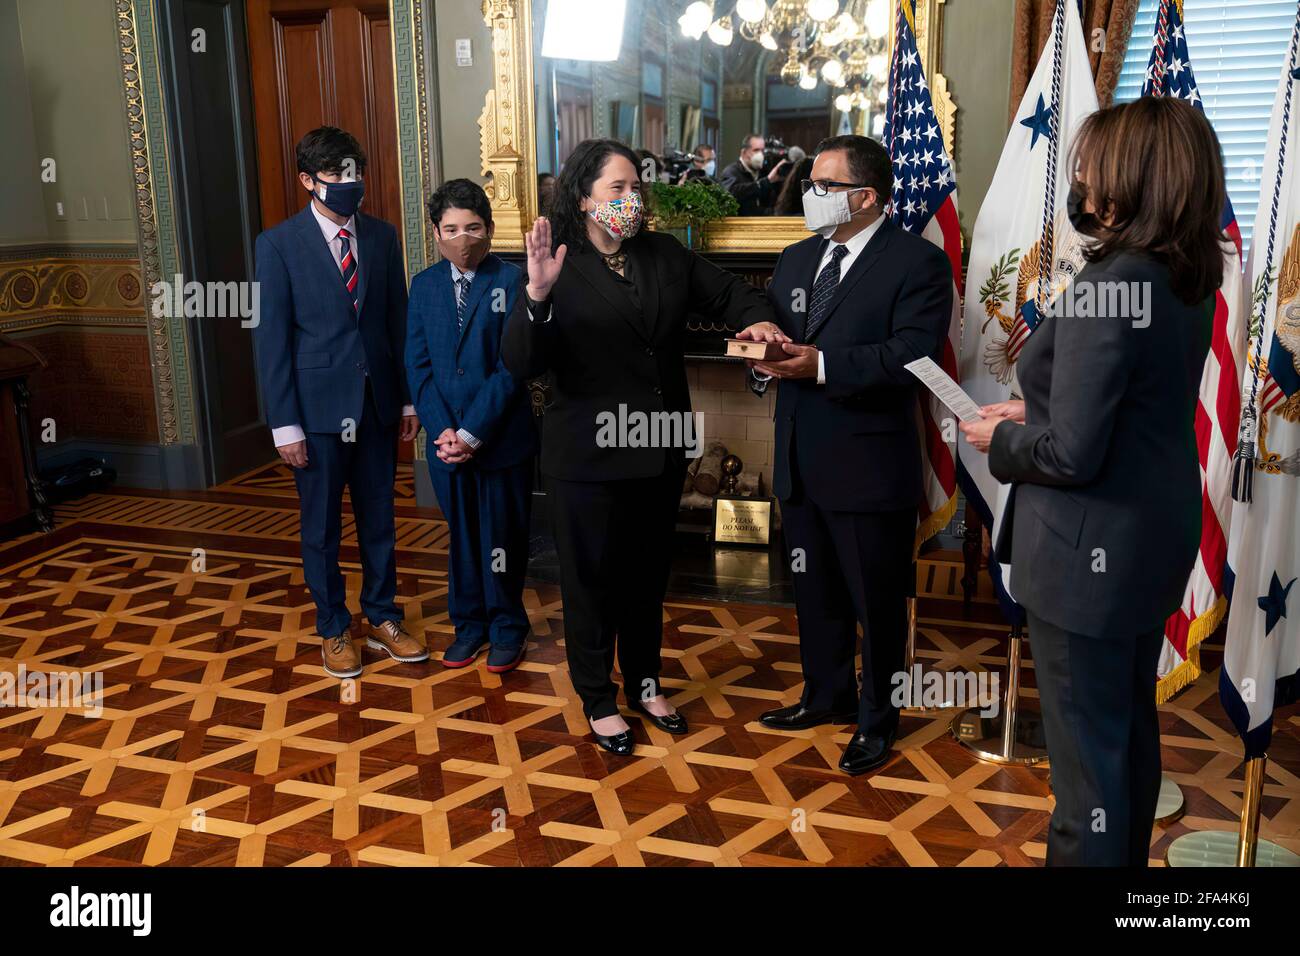 Vice President Kamala Harris swears-in Isabella Guzman as Small Business Administrator Monday, March 22, 2021, in the Vice President’s Ceremonial Office in the Eisenhower Executive Office Building at the White House. (Official White House Photo by Lawrence Jackson) Stock Photo